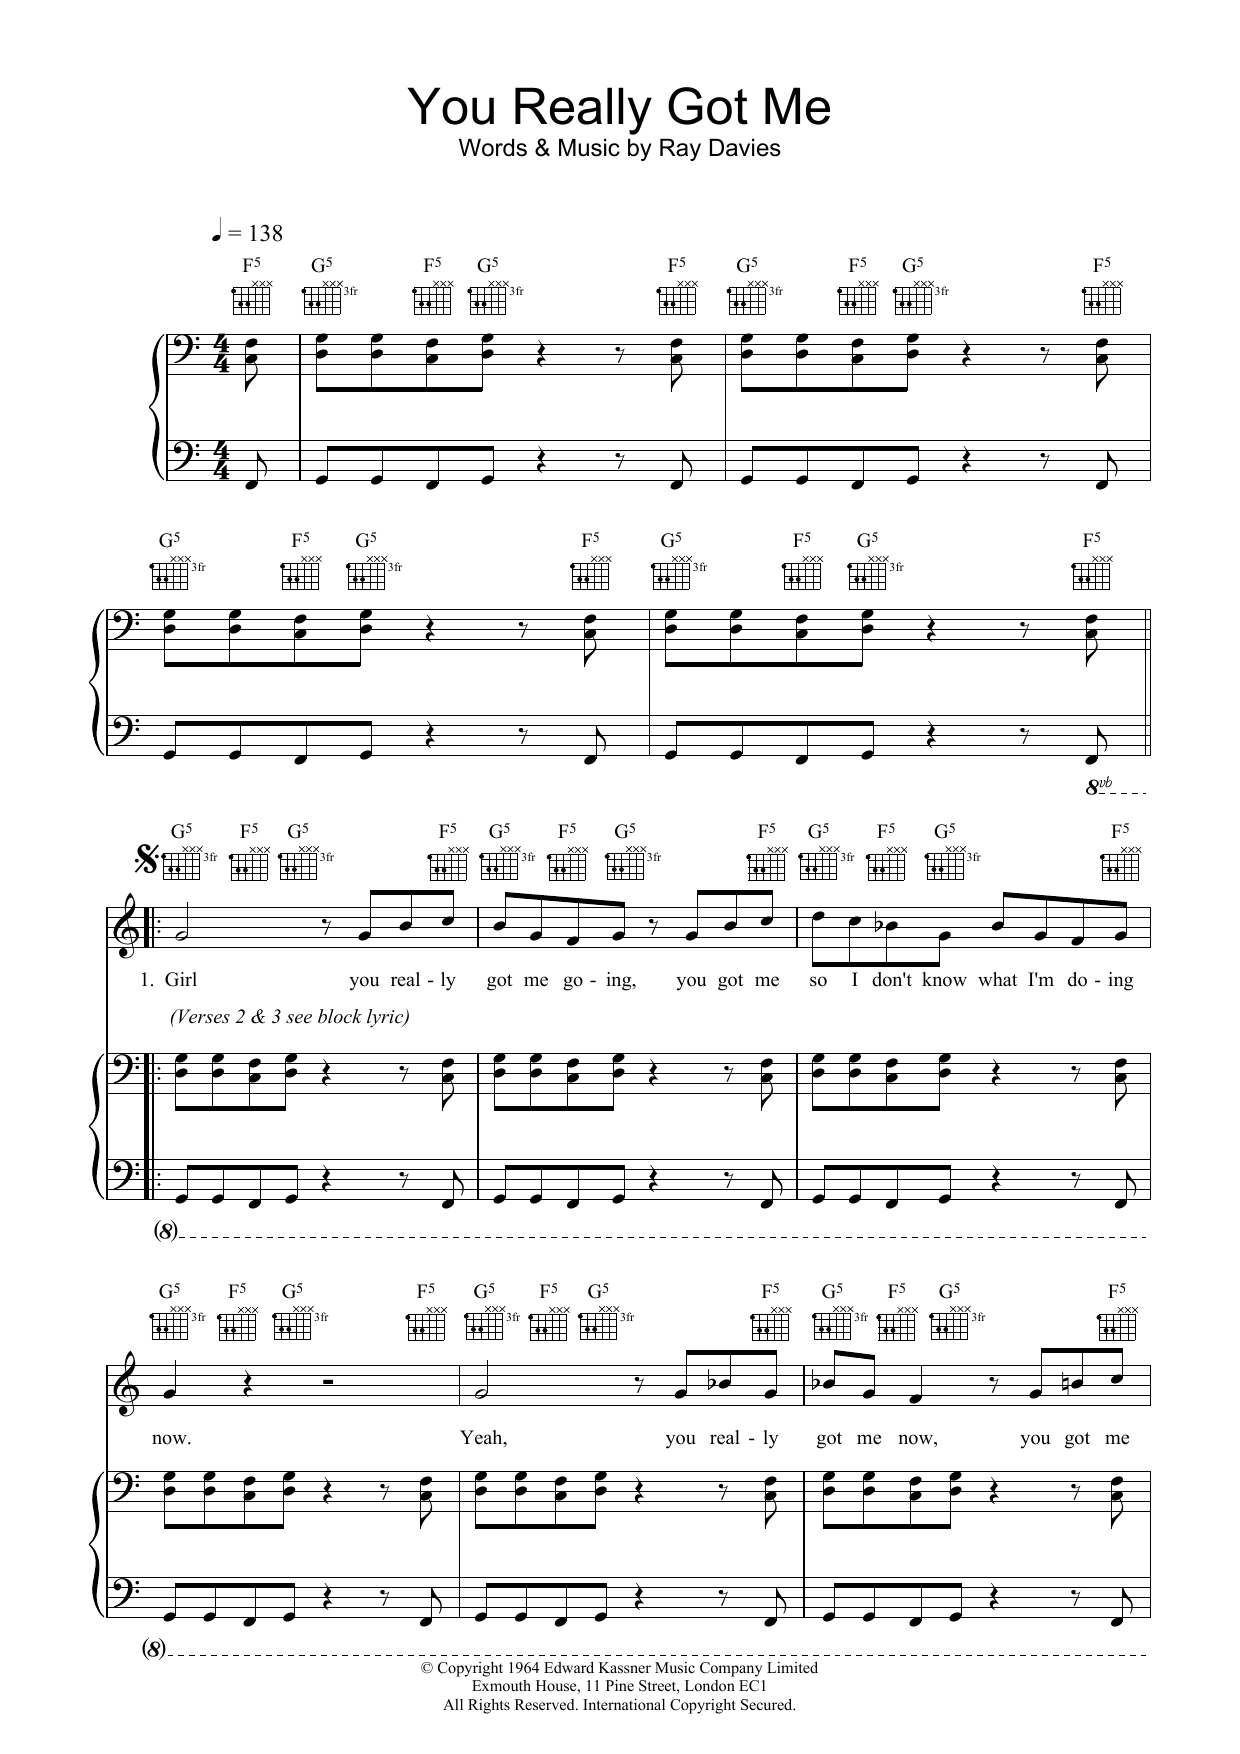 Download The Kinks You Really Got Me sheet music notes and chords for Piano, Vocal & Guitar - Download Printable PDF and start playing in minutes.